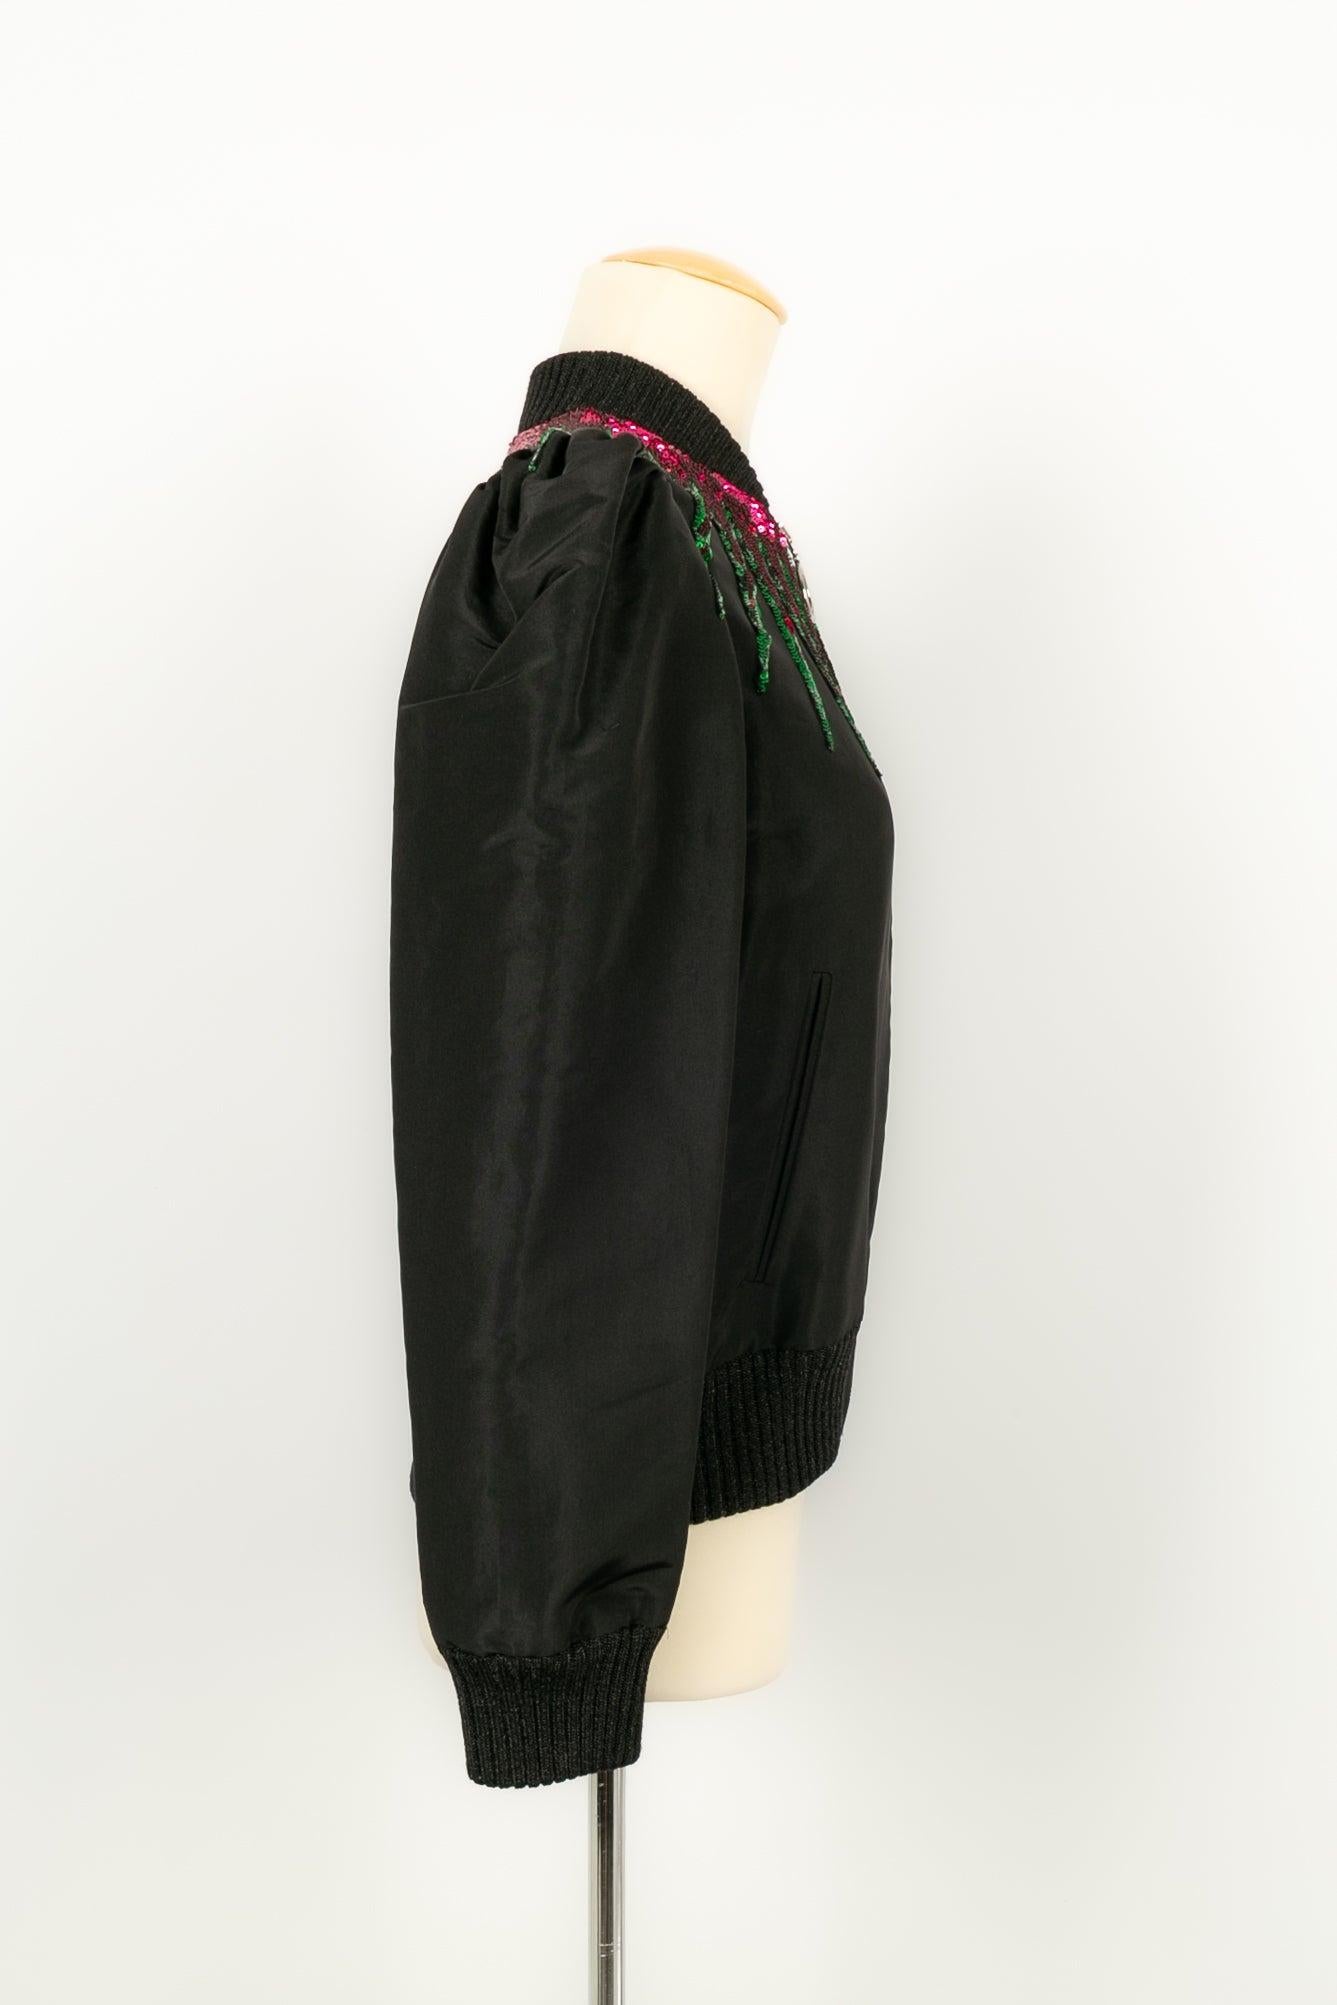 Gucci - (Made in Italy) Black and pink jacket in silk and cotton embroidered with sequins on the collar. Size 42IT.

Additional information:
Condition: Very good condition
Dimensions: Shoulder width: 40 cm - Sleeve length: 62 cm - Length: 54